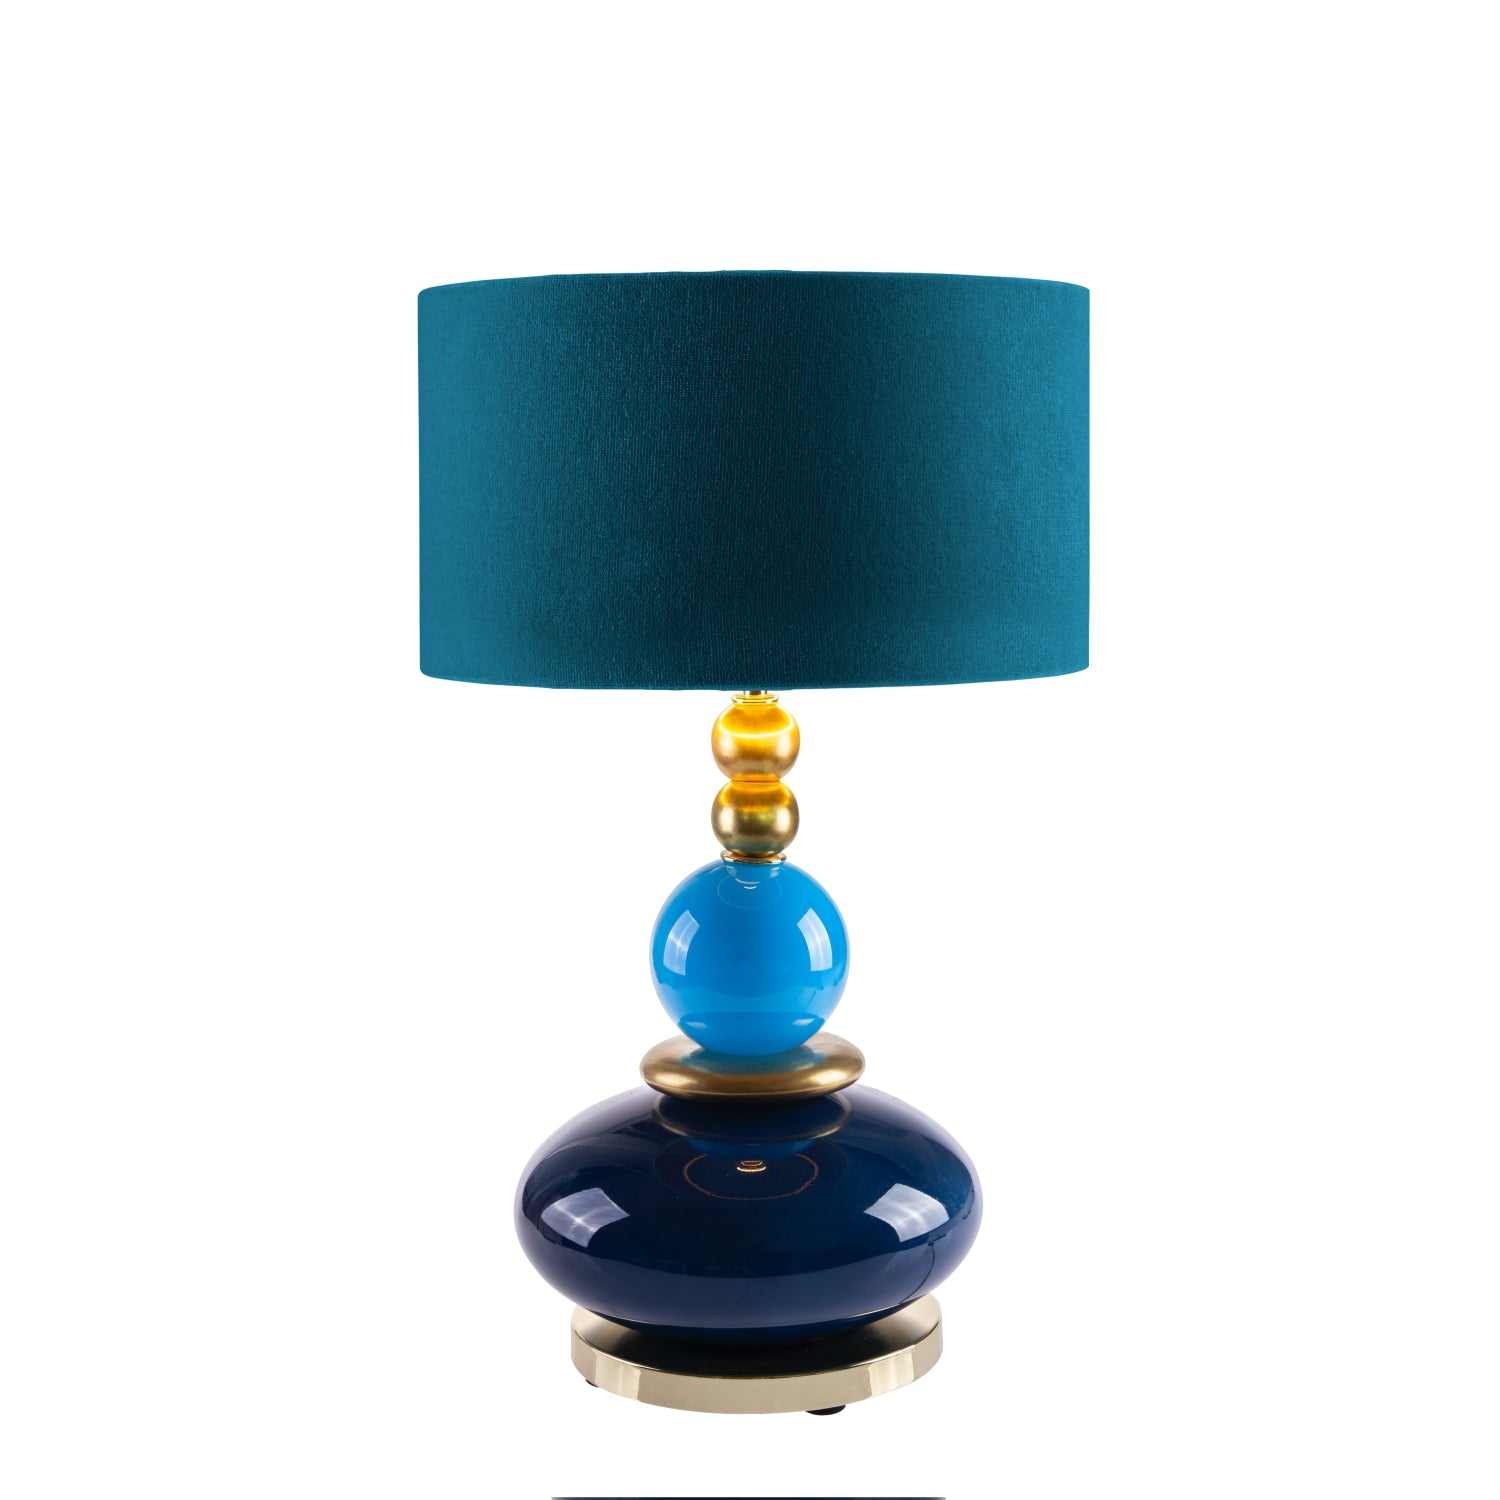 Violette Small Table Lamp - Blue & Gold